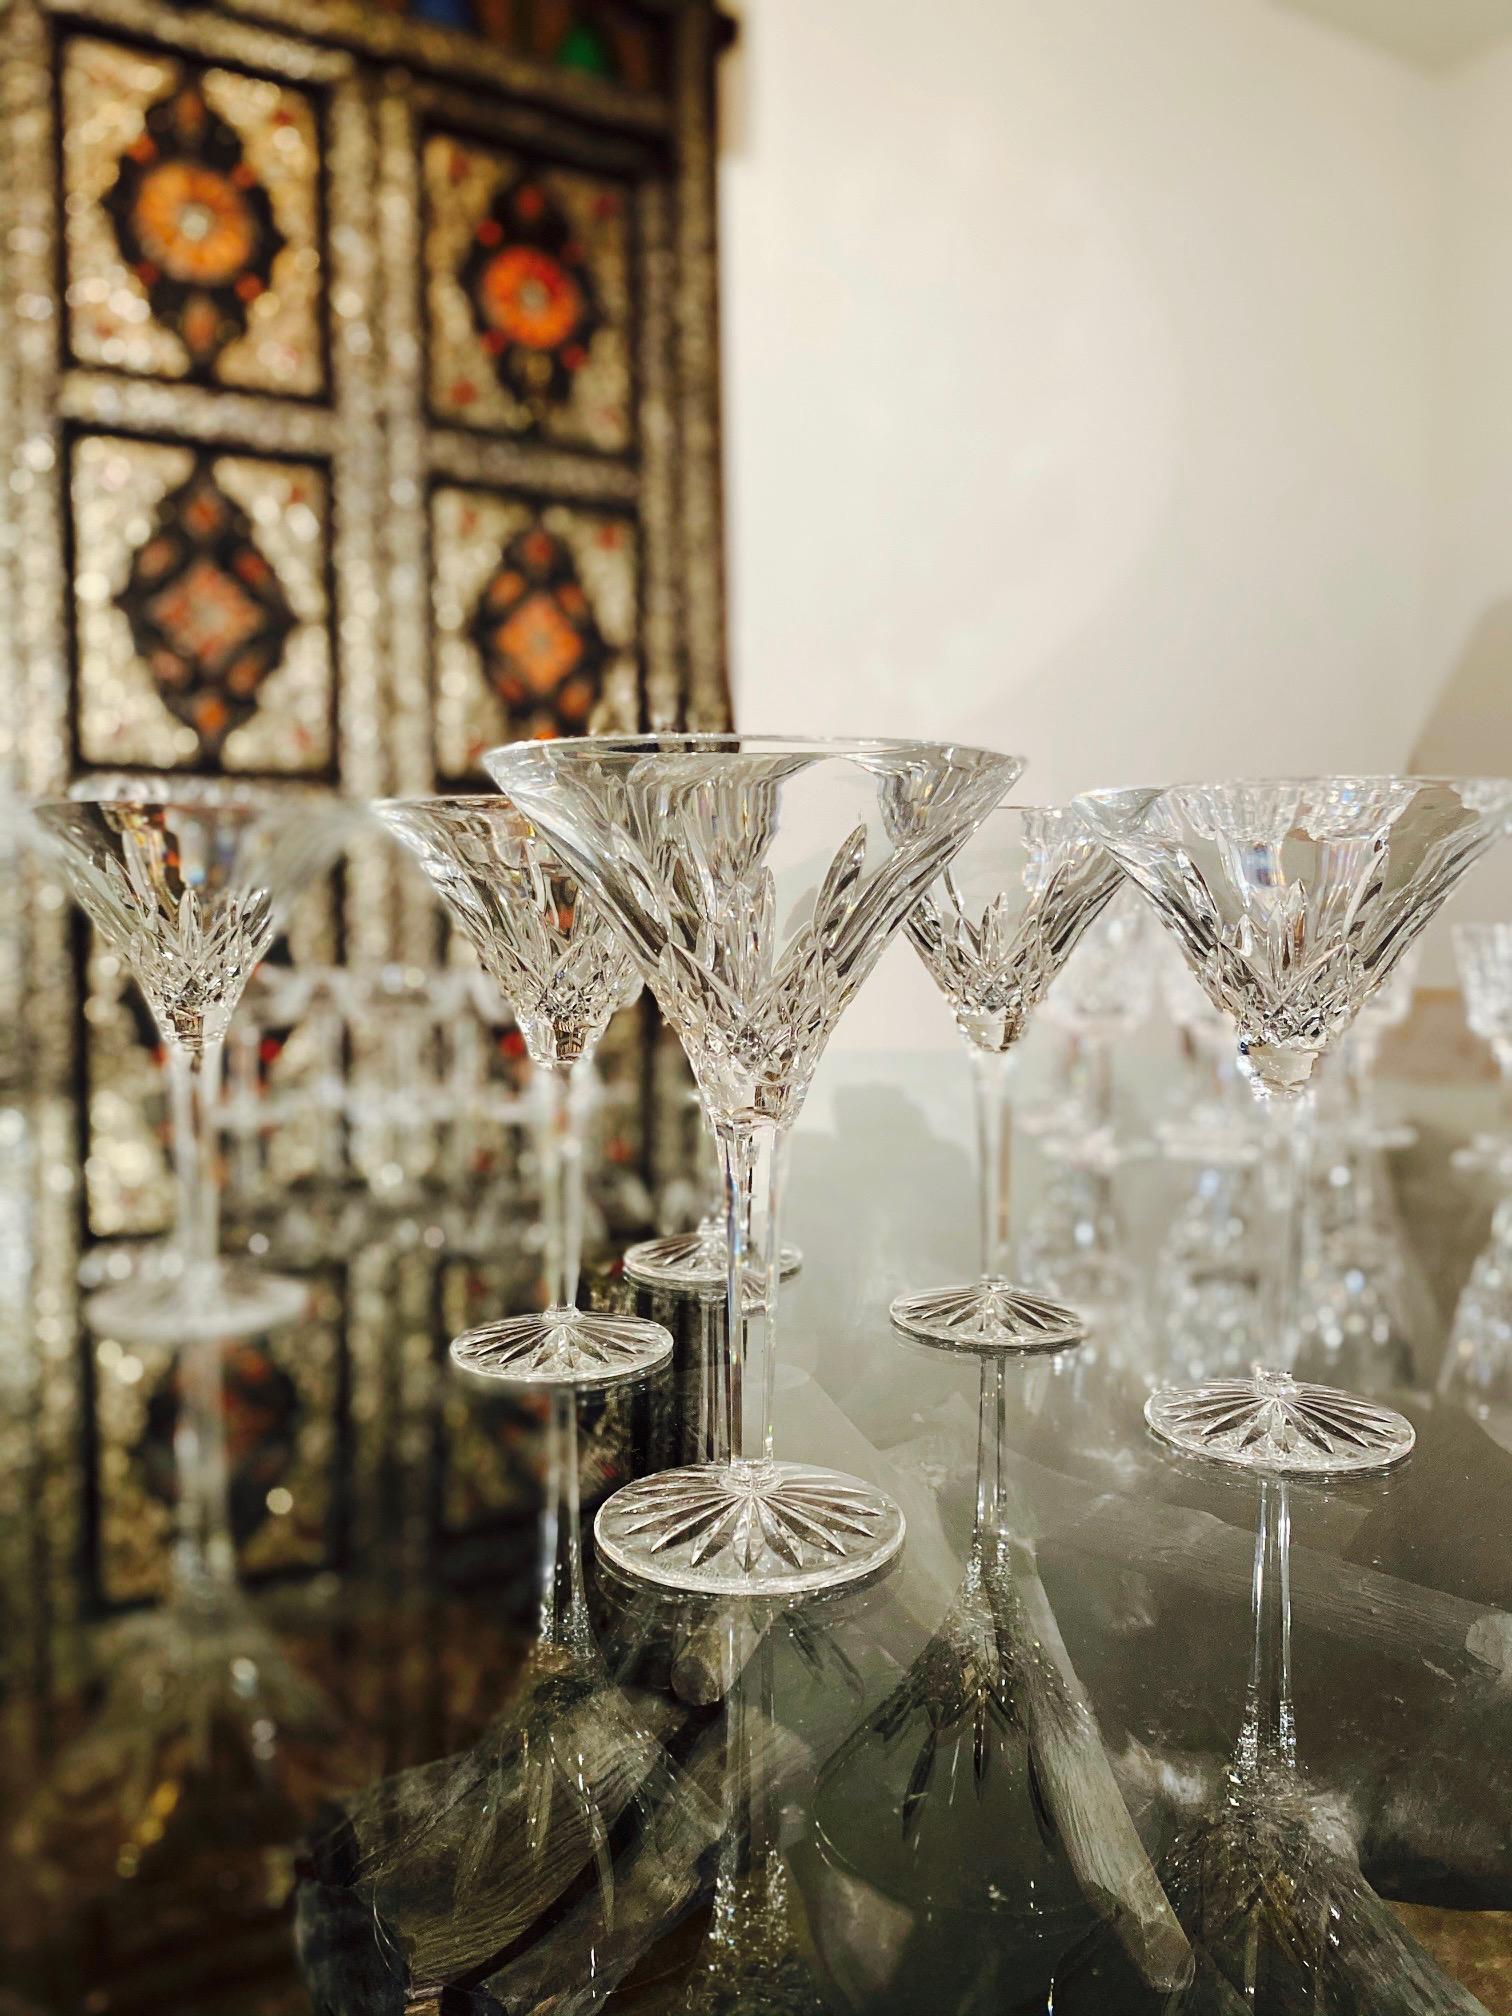 Set of six vintage luxury crystal tall martini glasses from Waterford Crystal. The Lismore Collection is perhaps Waterford's most distinguished design featuring hand blown crystal with the pattern's signature diamond and wedge cuts. First introduced